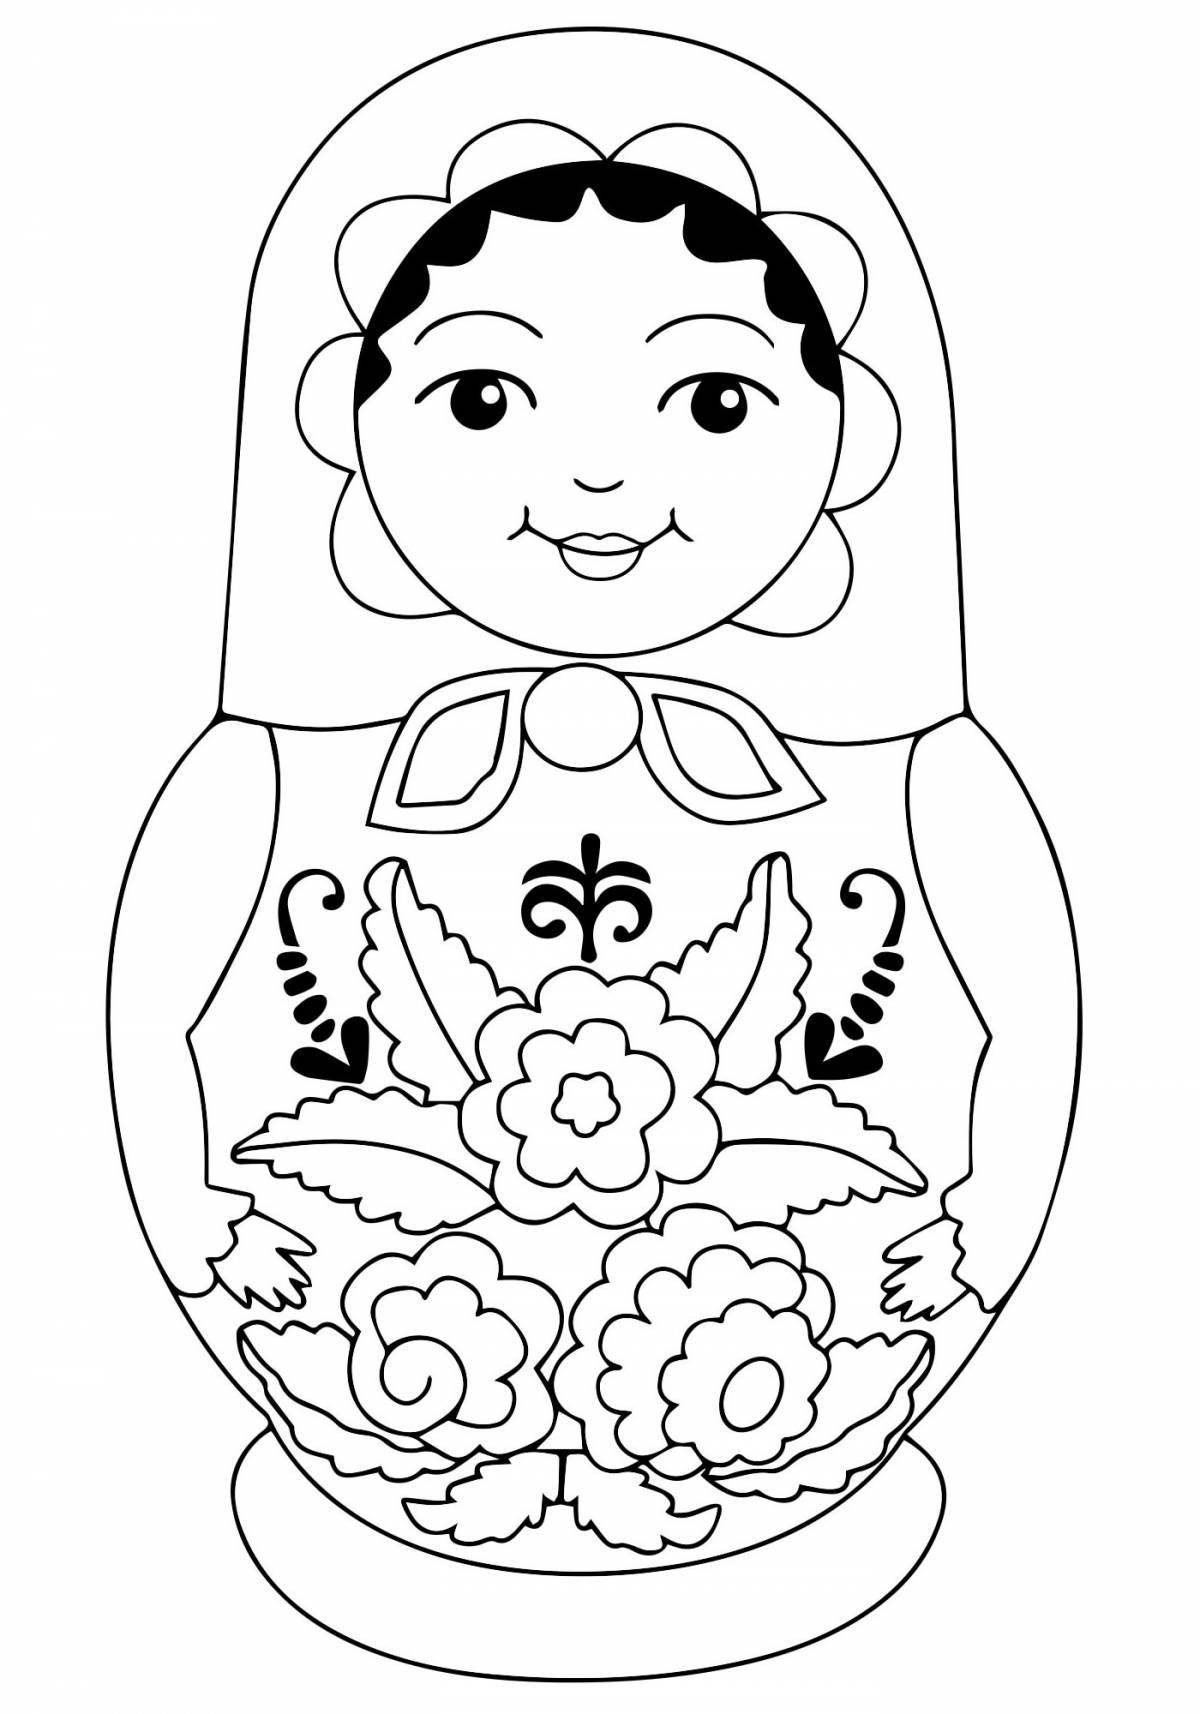 Delightful coloring matryoshka for children 5-6 years old